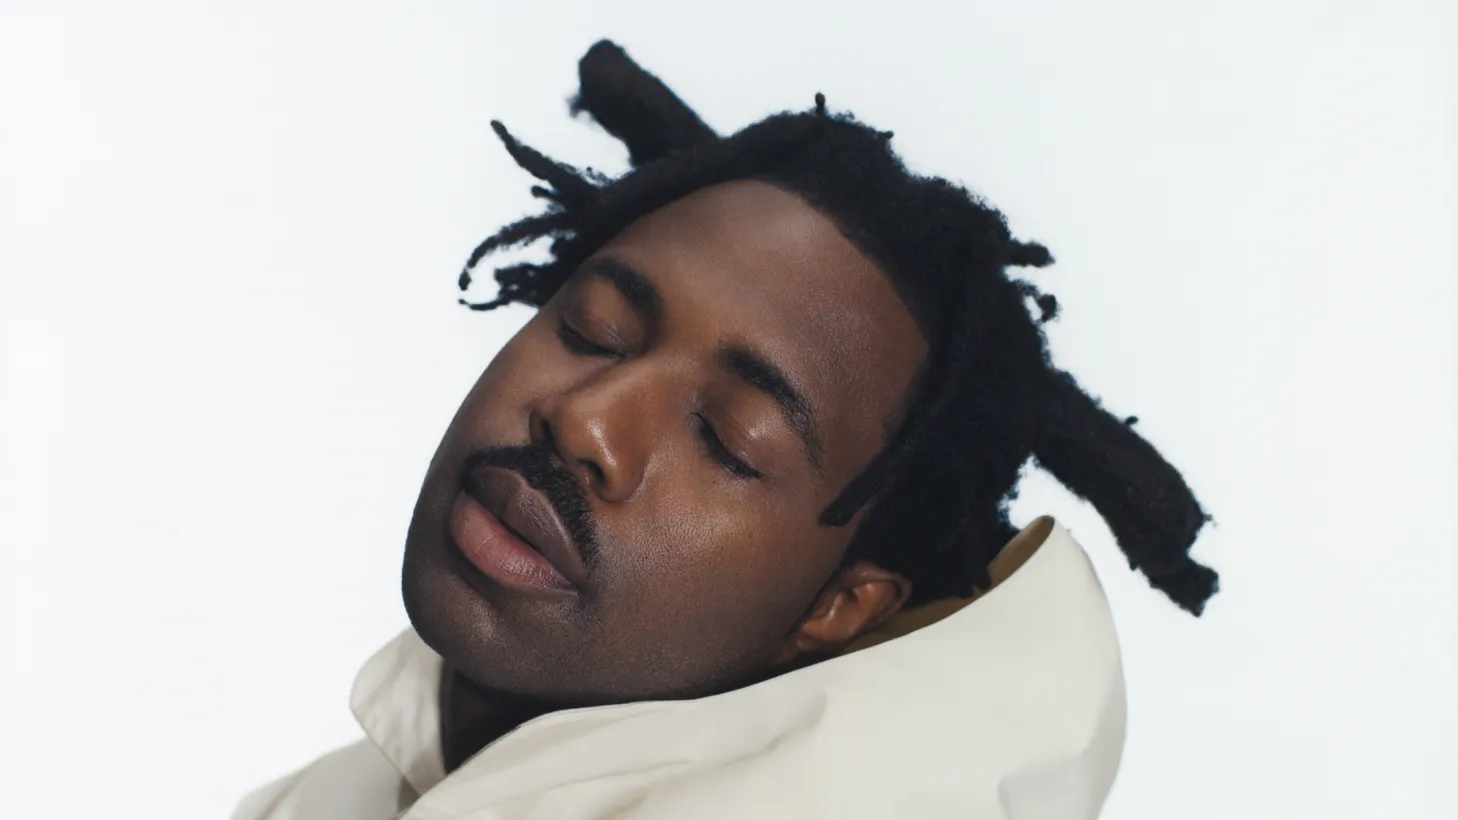 Sampha finds solace in the spiritual realm.